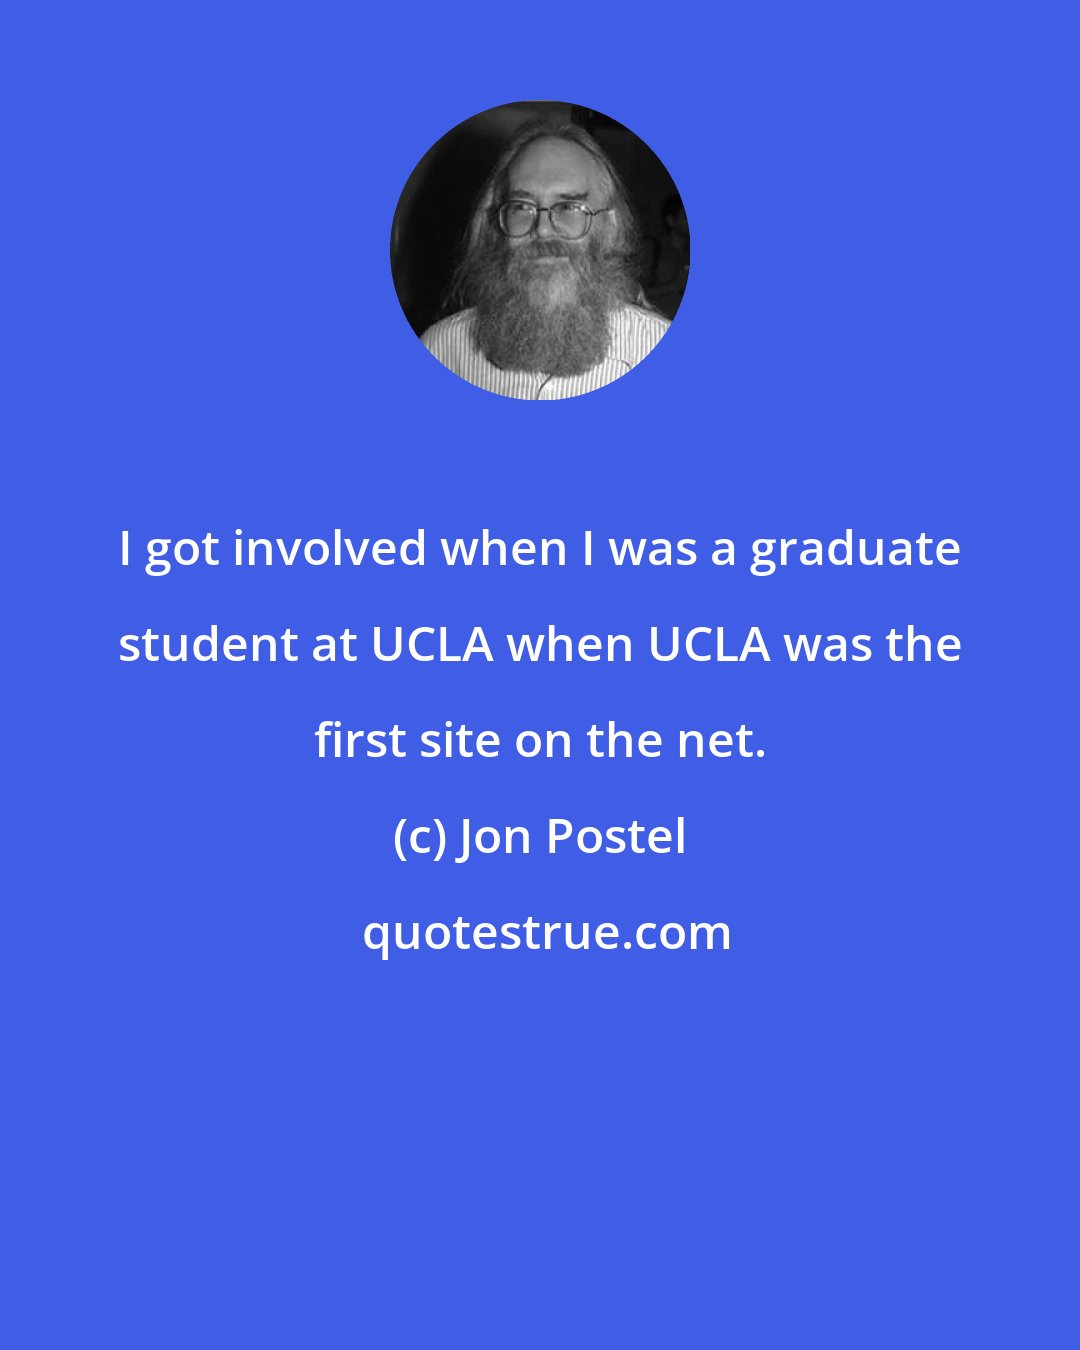 Jon Postel: I got involved when I was a graduate student at UCLA when UCLA was the first site on the net.